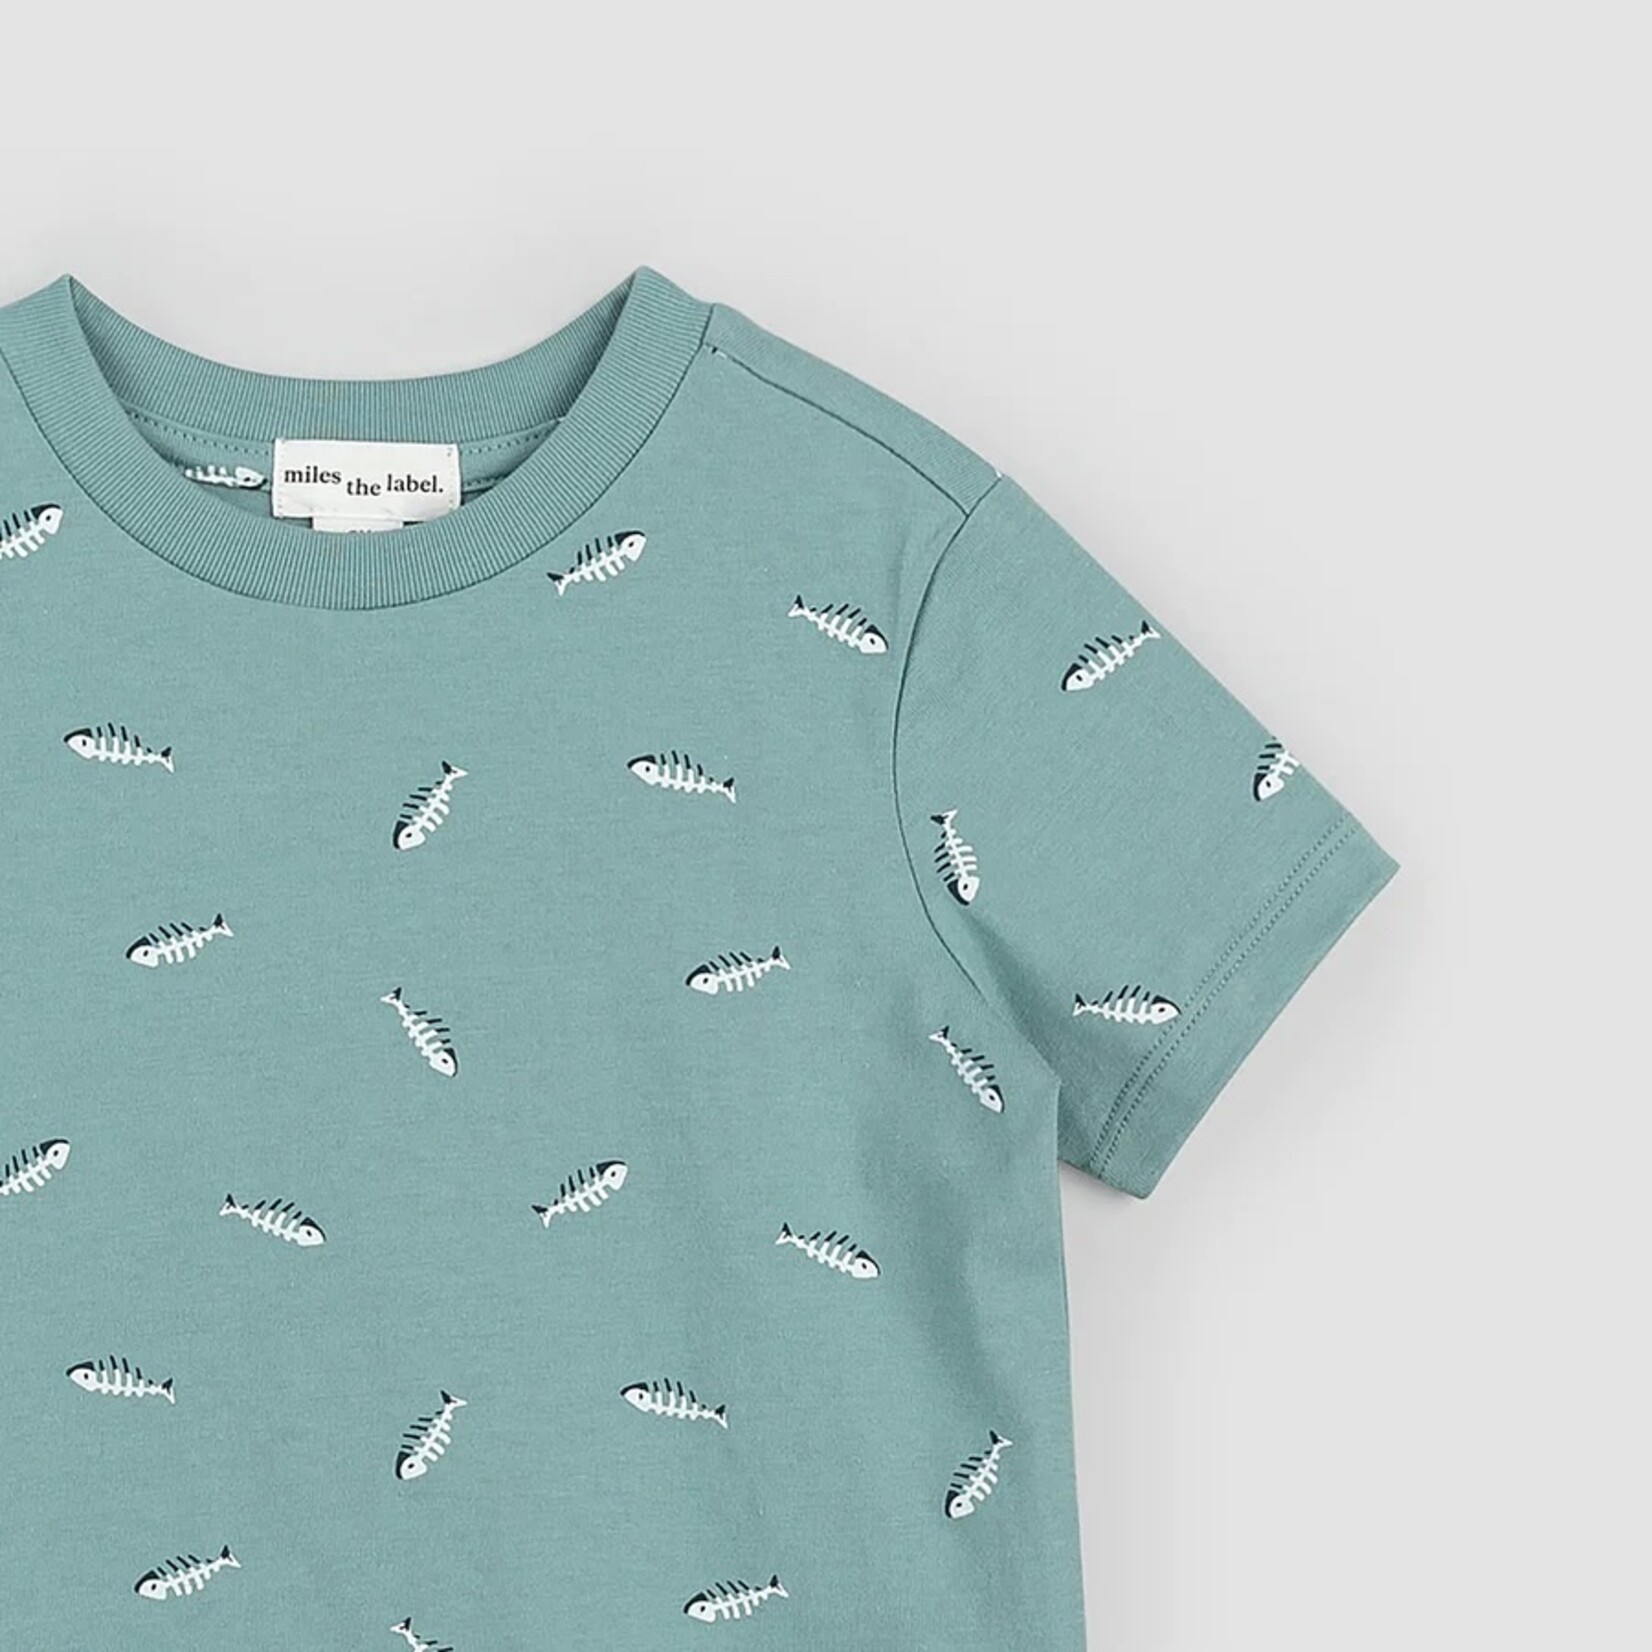 Miles the label MILES THE LABEL - Teal Short Sleeve T-Shirt with Fish Skeleton Print